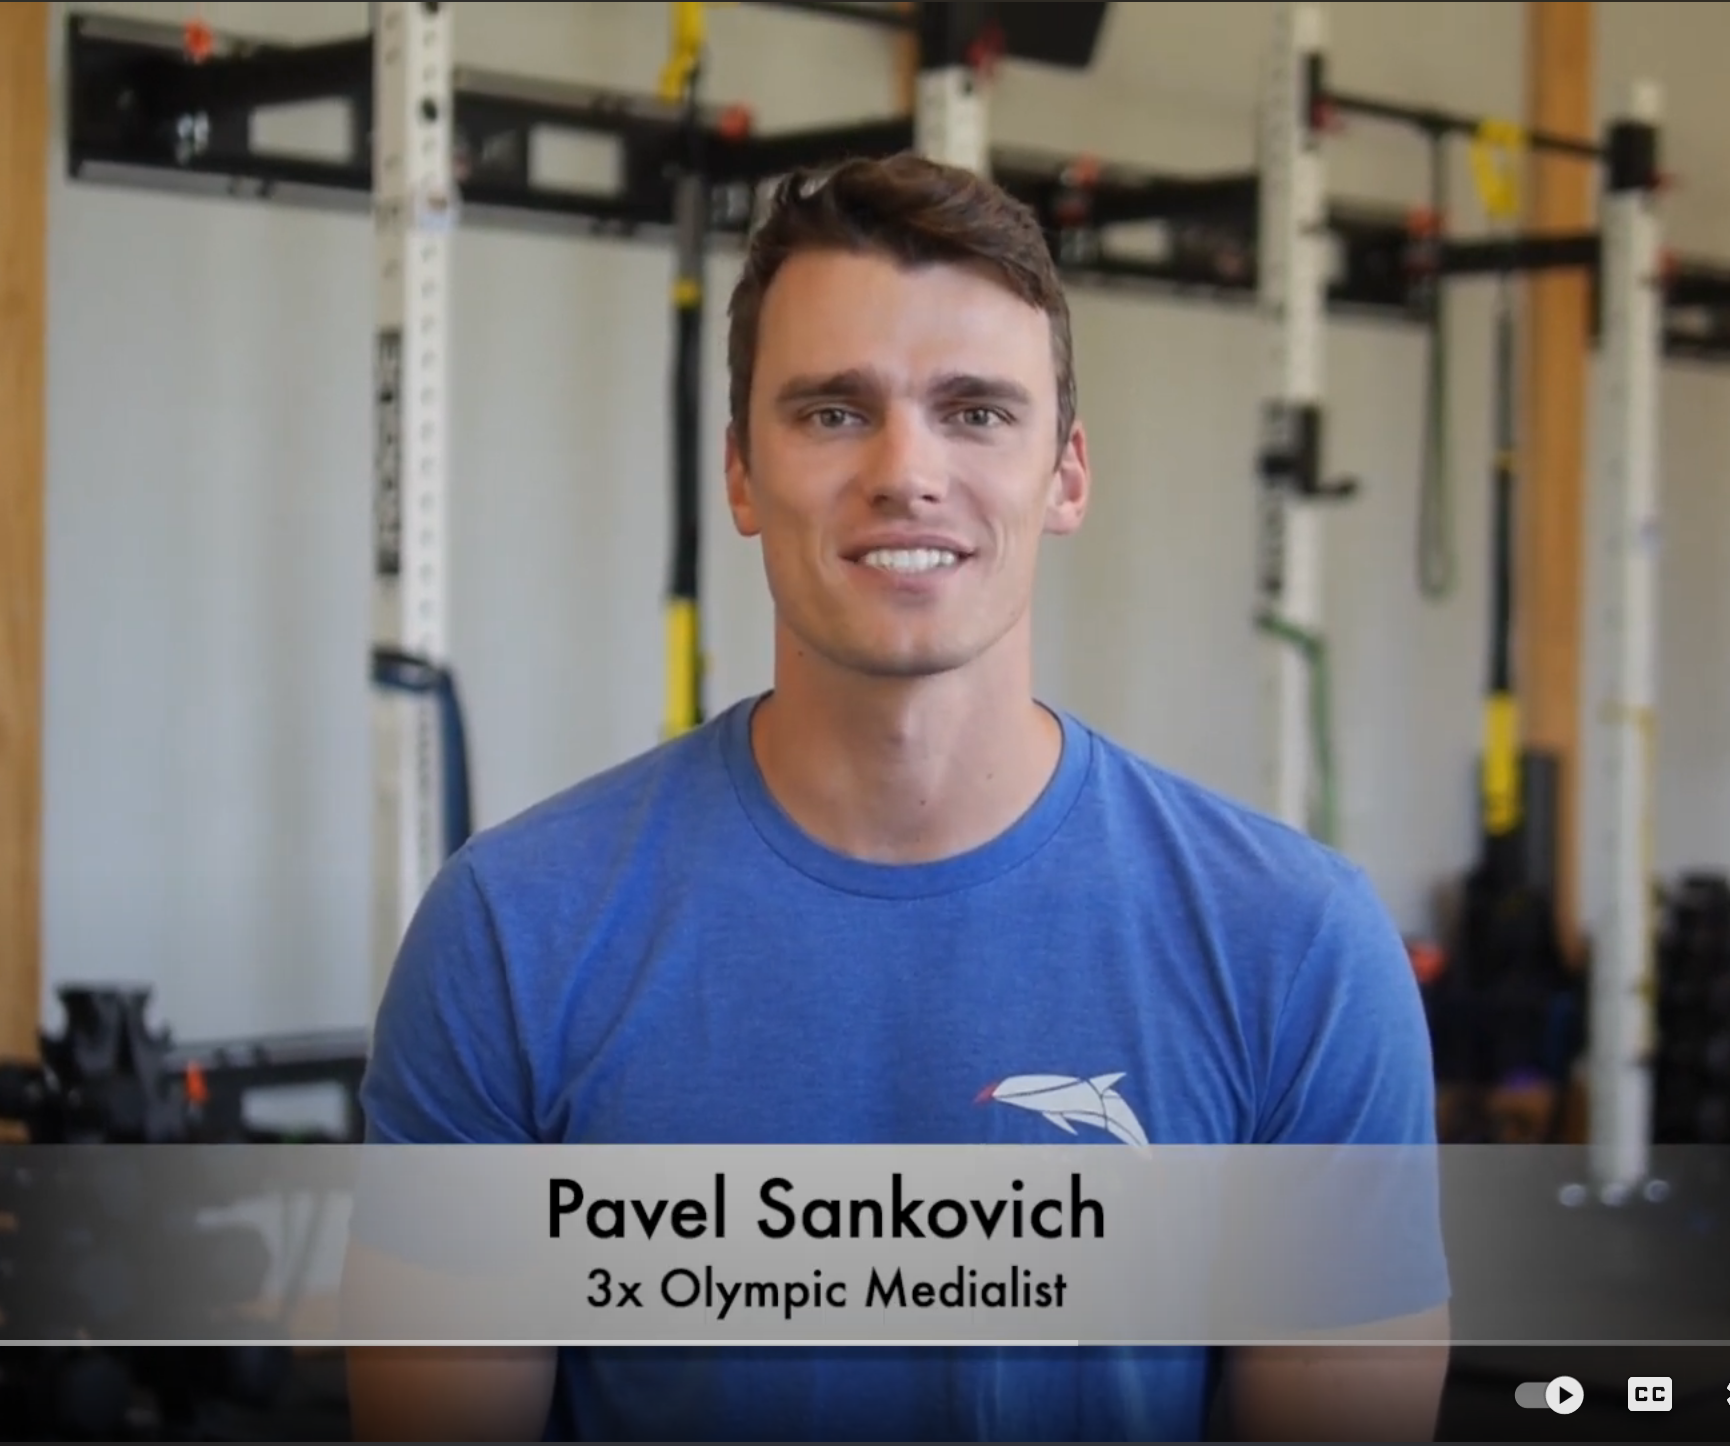 3 time olympic medalist video Pavel